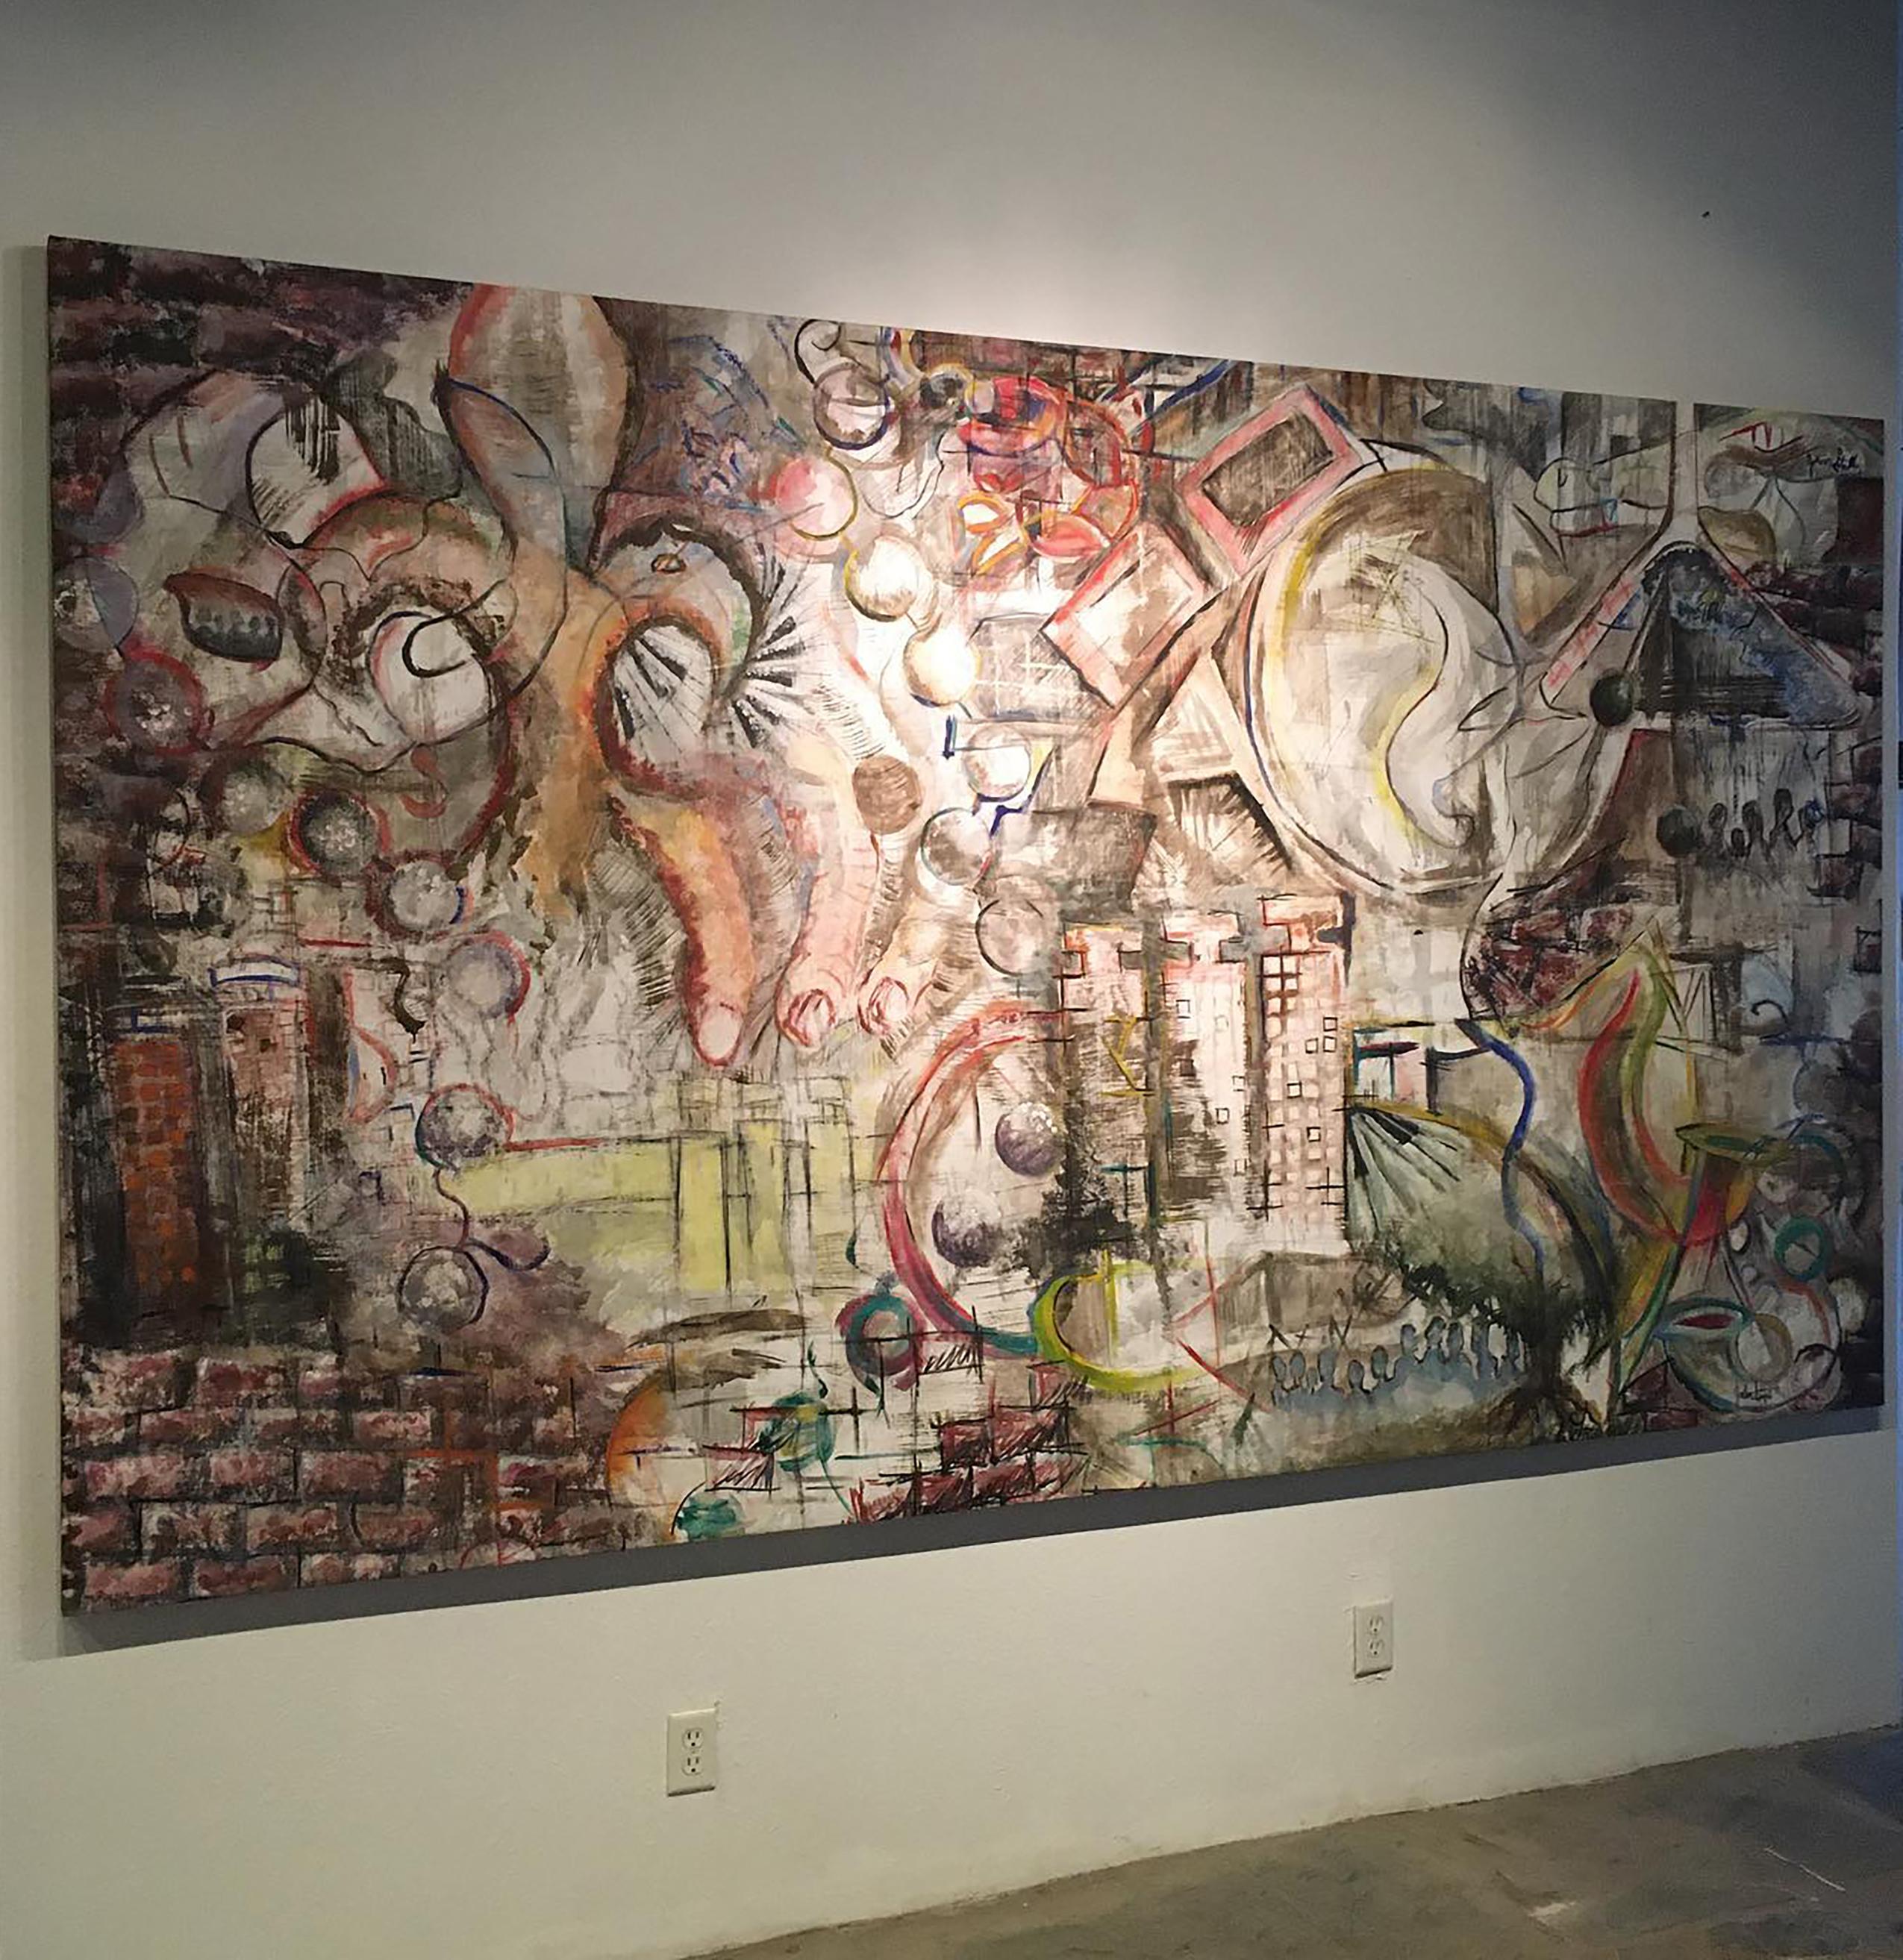 A mixed media painting of impressive scale on canvas created by Jason Stallings. Originally created for and curated and featured in a juried exhibition at a show in New Jersey in 2008. The stretcher frame was custom built and reinforced by the